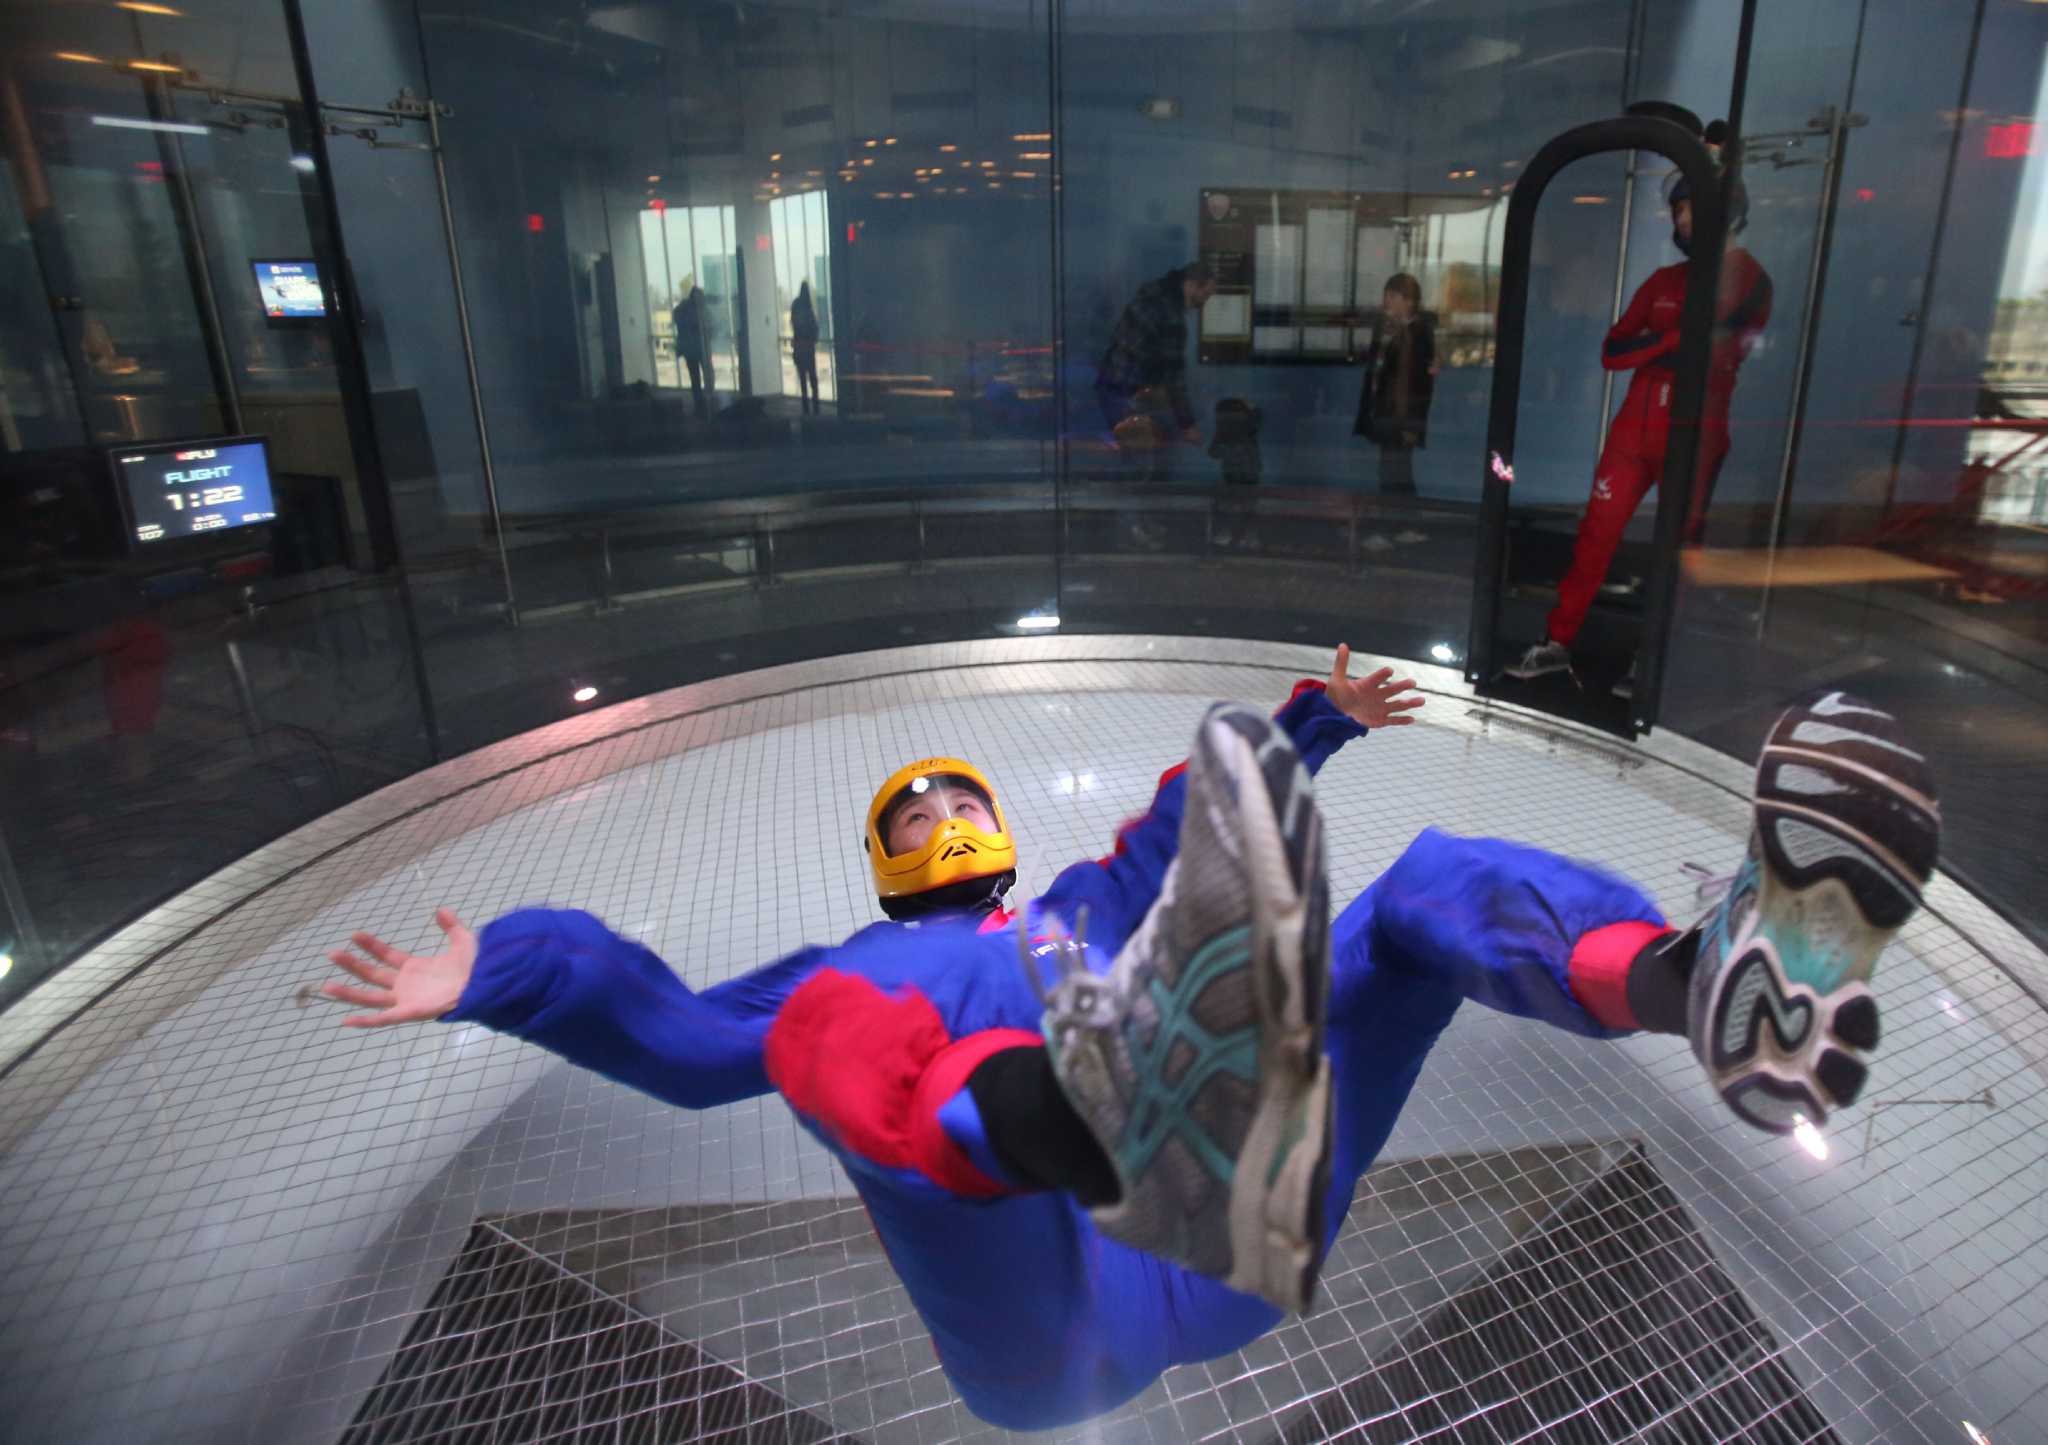 iFLY indoor skydiving facility offers free-falling fun - Houston Chronicle